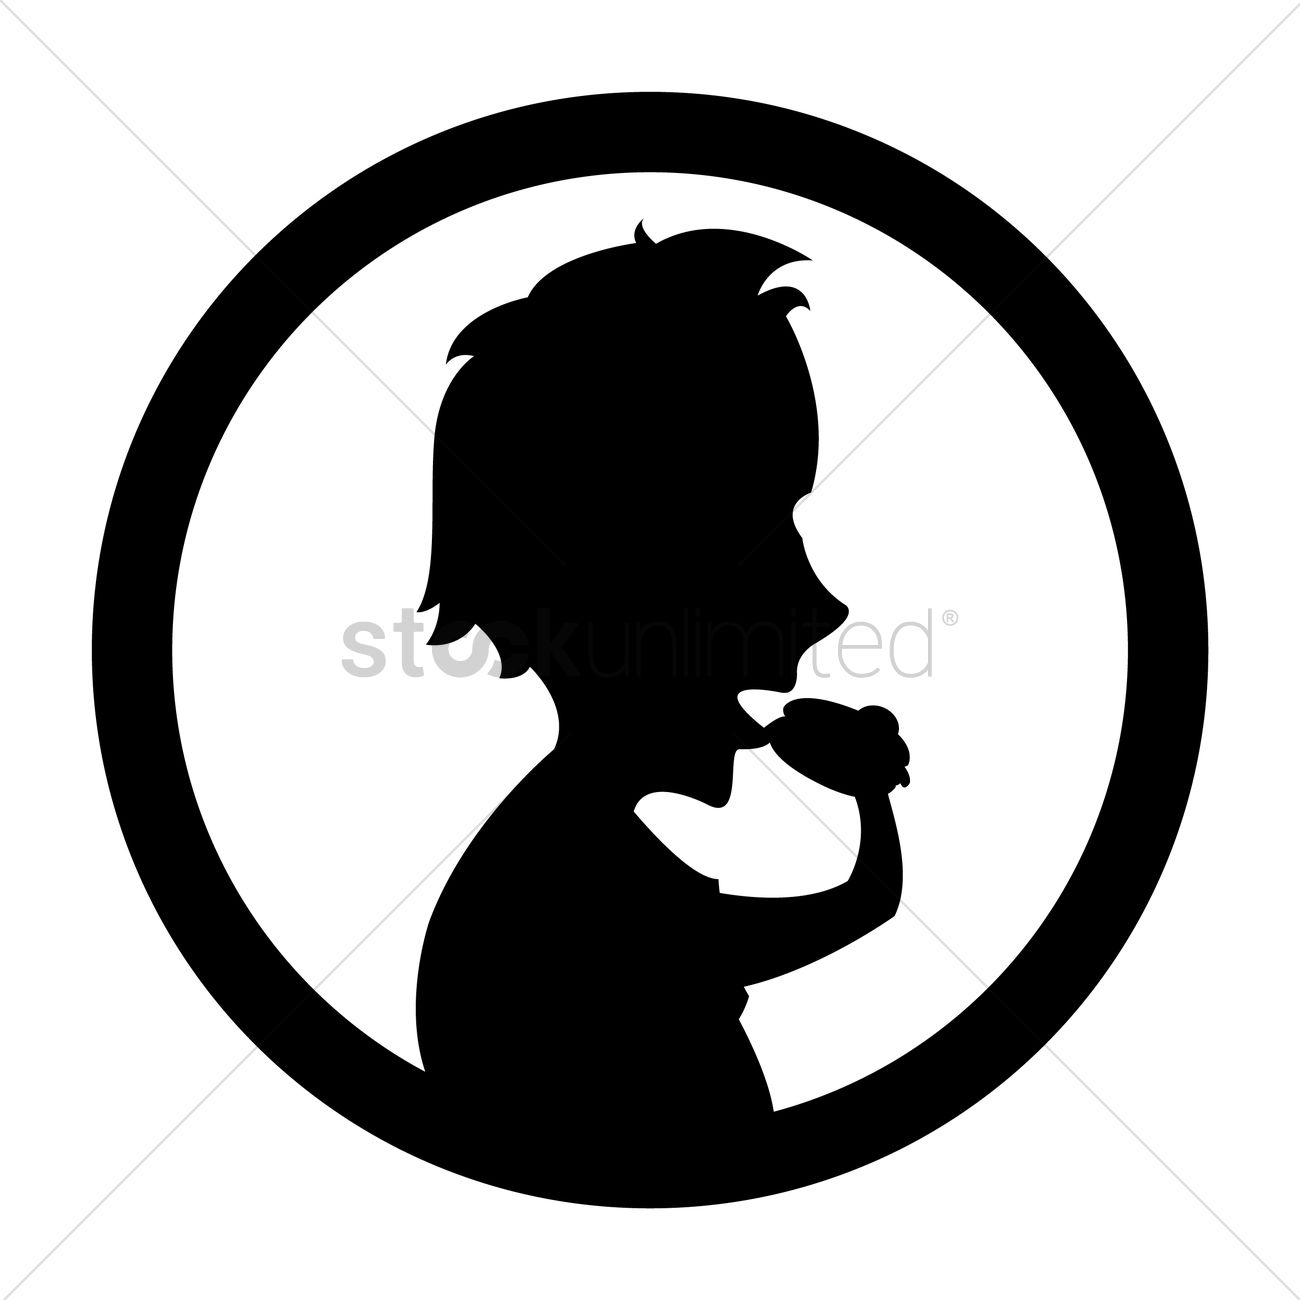 Silhouette of man eating burger Vector Image - 1501905 ...